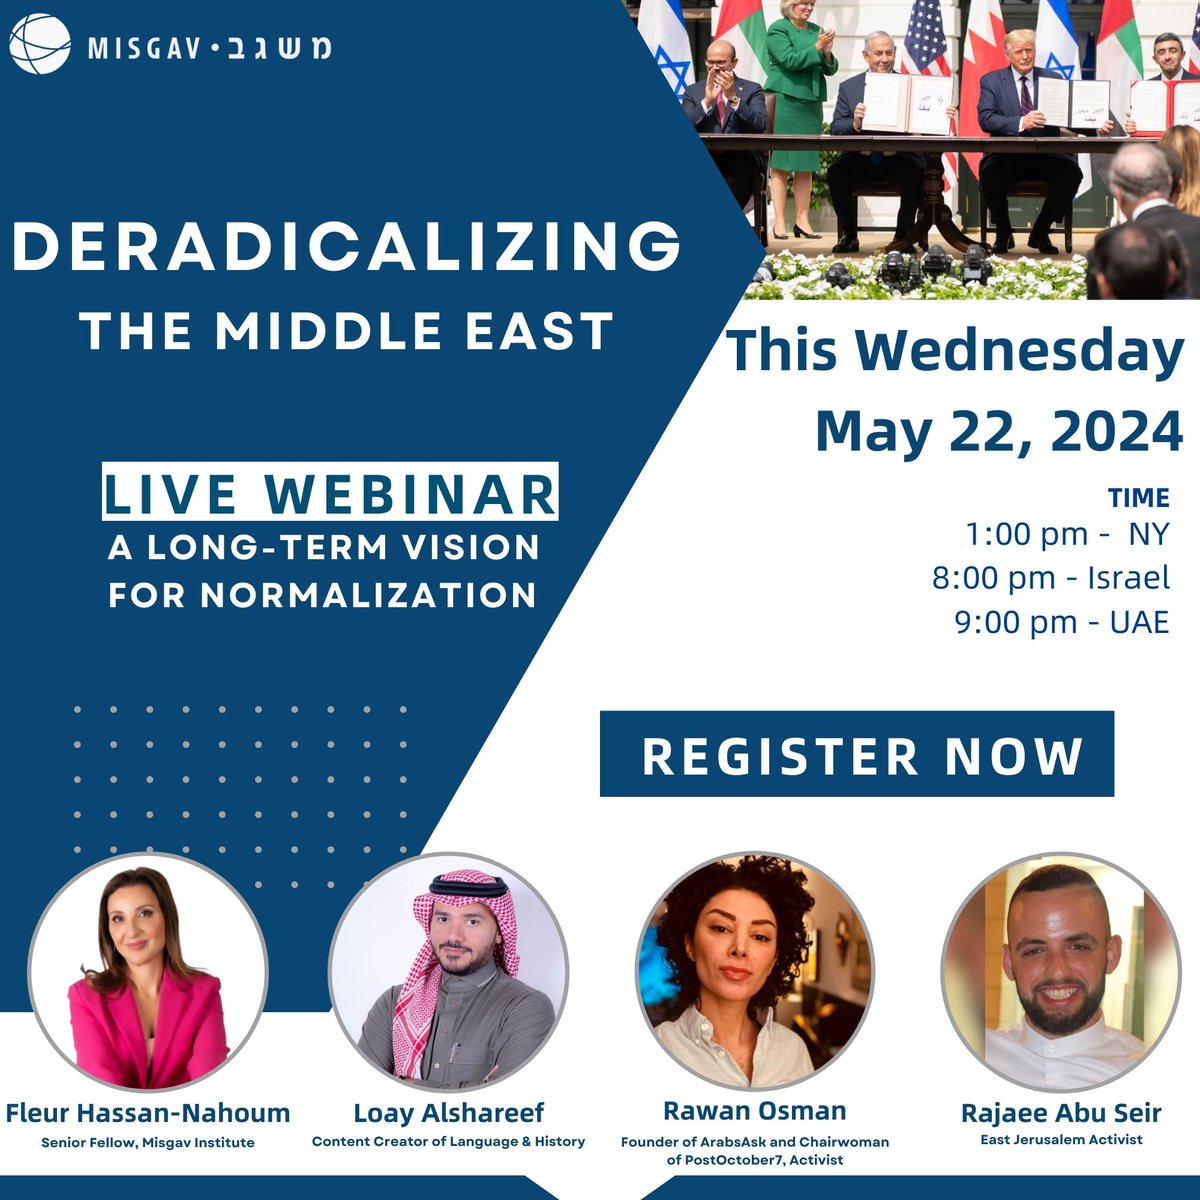 A Long-Term Vision for Normalization The Misgav Institute invites you to a webinar on “Deradicalizing the Middle East”, with Fleur Hassan-Nahoum, Loay Alshareef, Rawan Osman & Rajaee Abu Seir. Register Now! 🔽 bit.ly/4dATOsa @FleurHassanN @lalshareef @RawaneOsmane